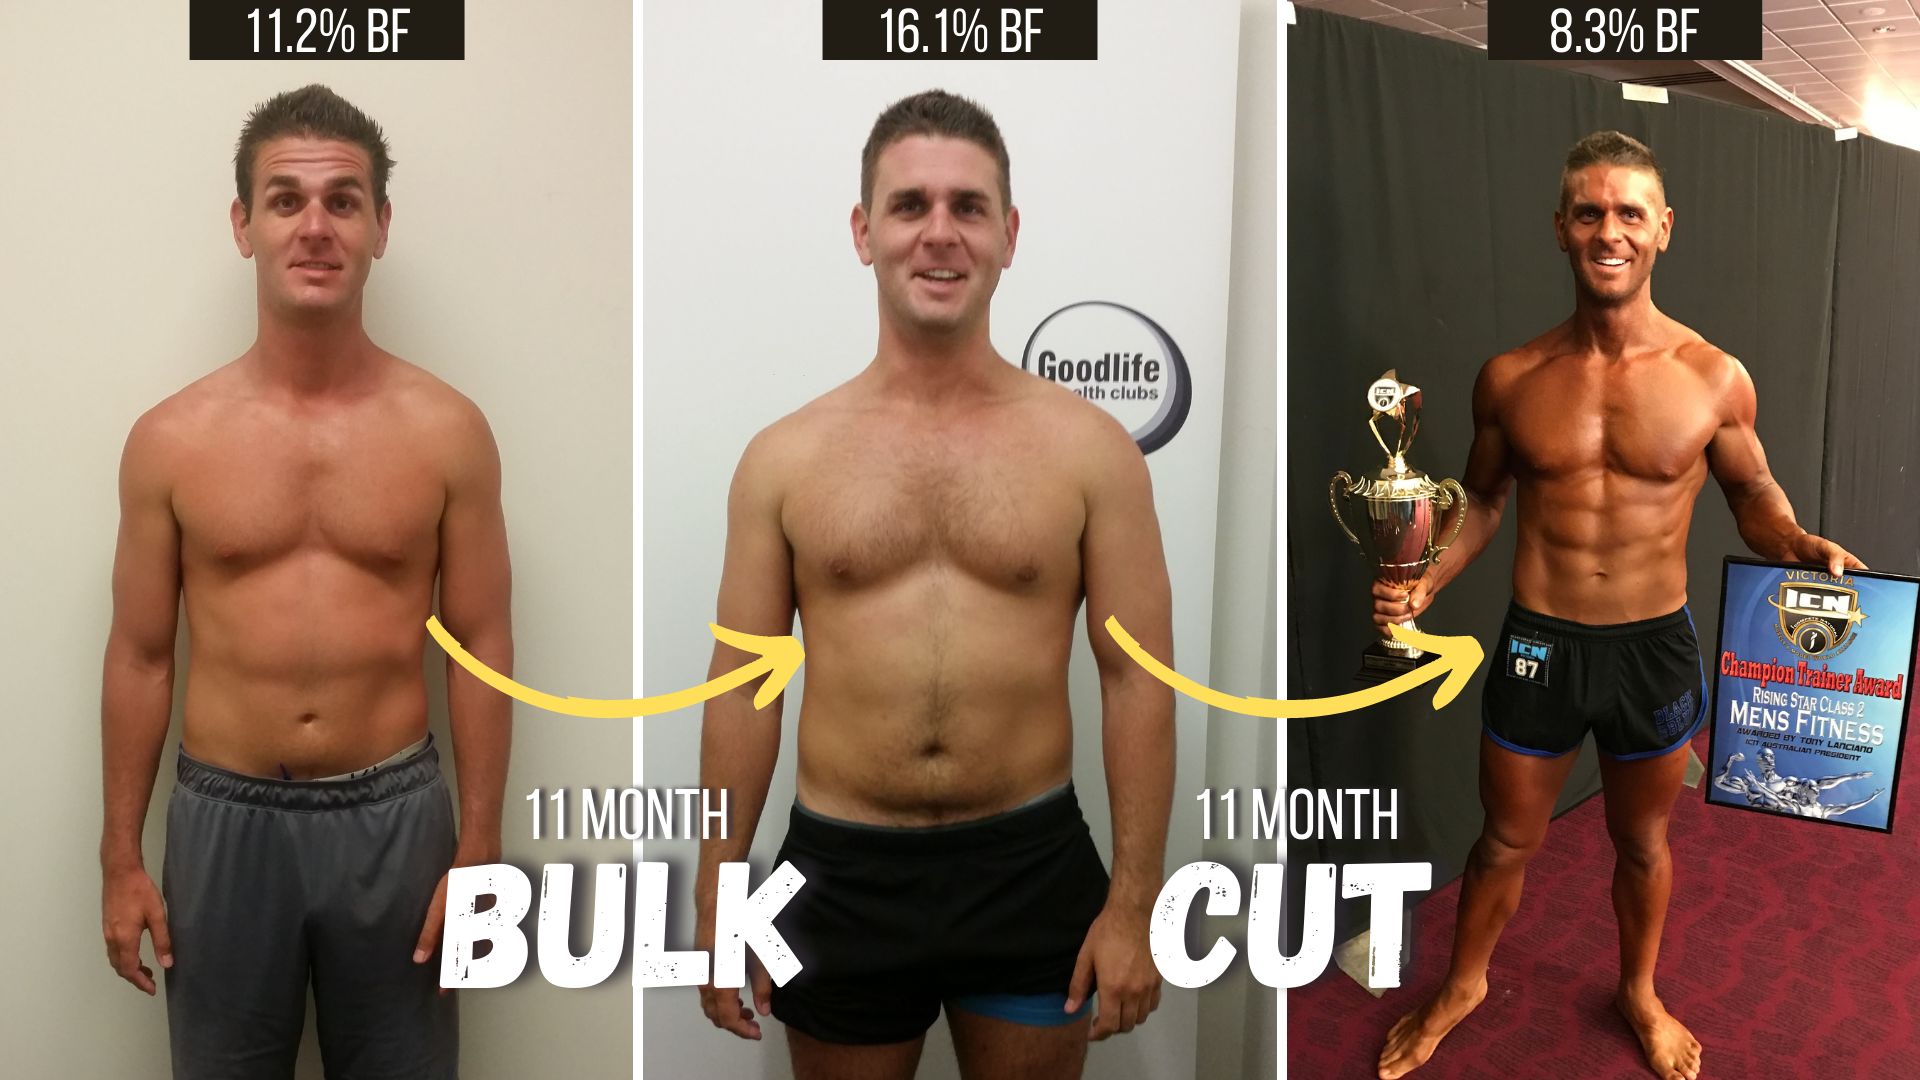 Bulking vs. Cutting: What's the Best Way to Build Muscle?